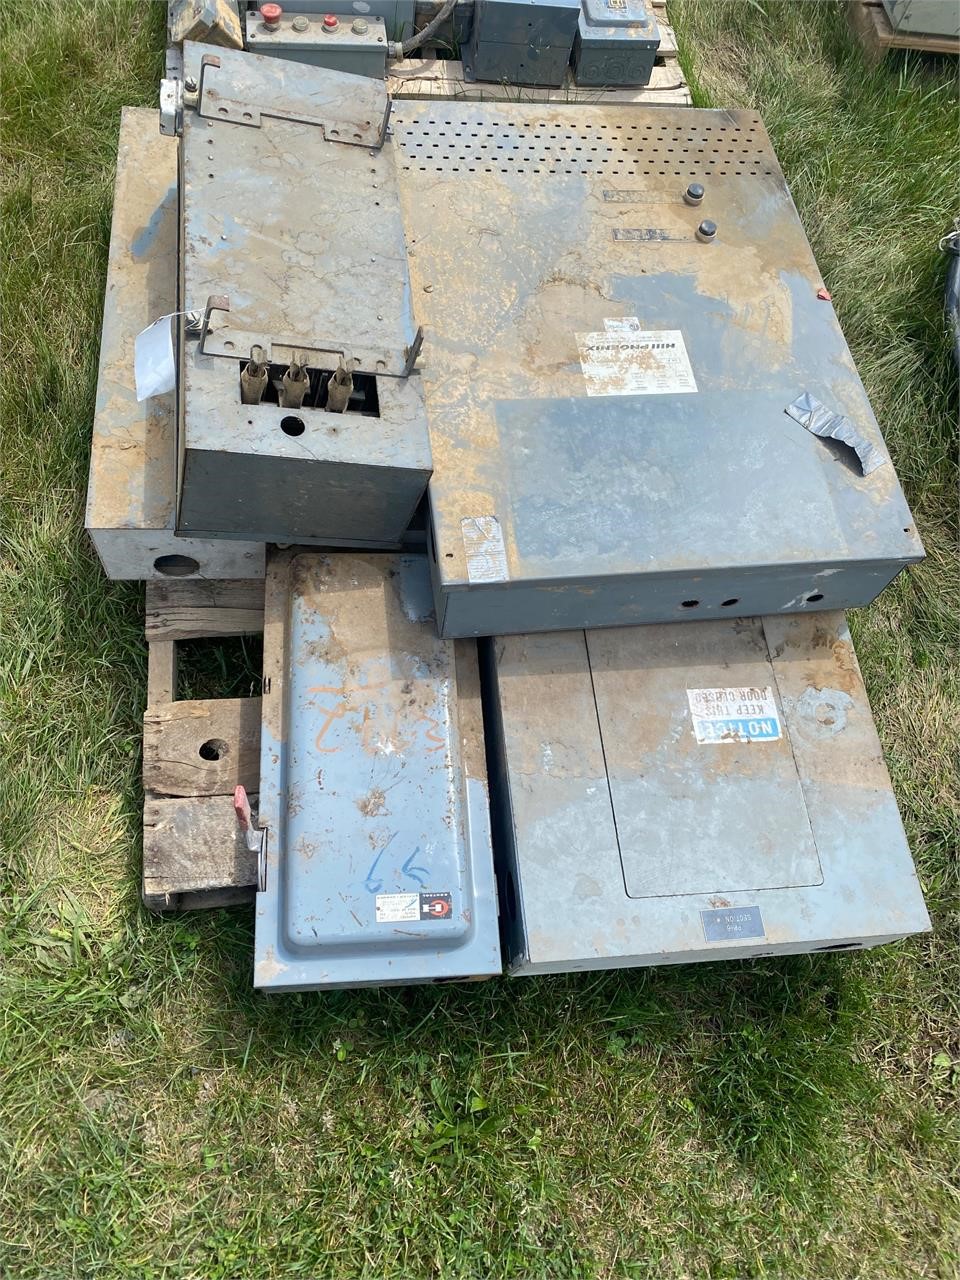 SKID OF ELECTRICAL BOXES